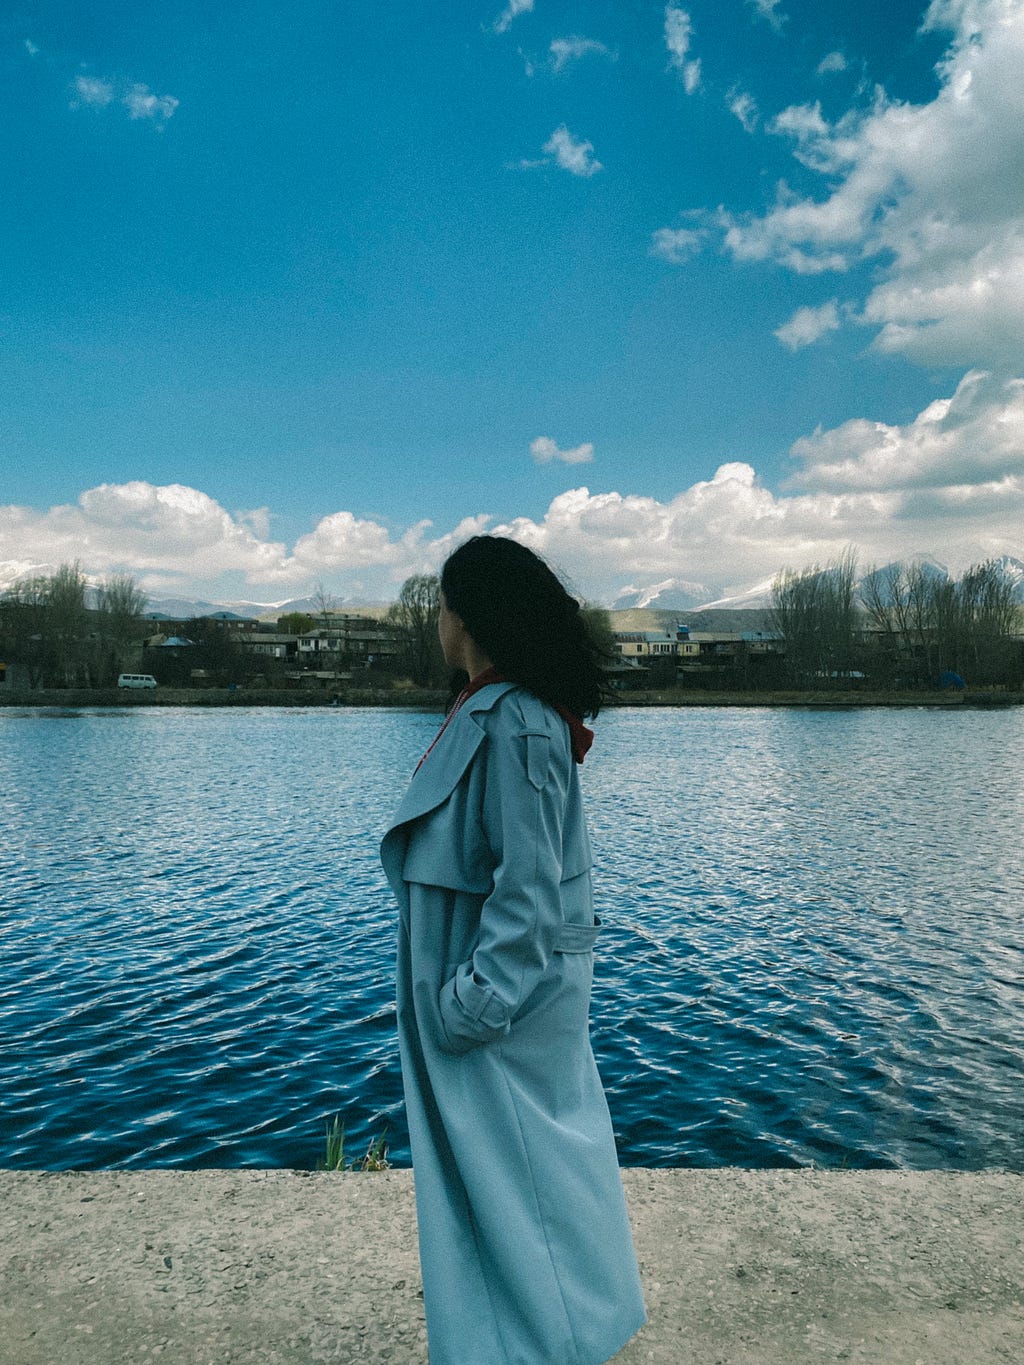 A girl staring at the river behind her.